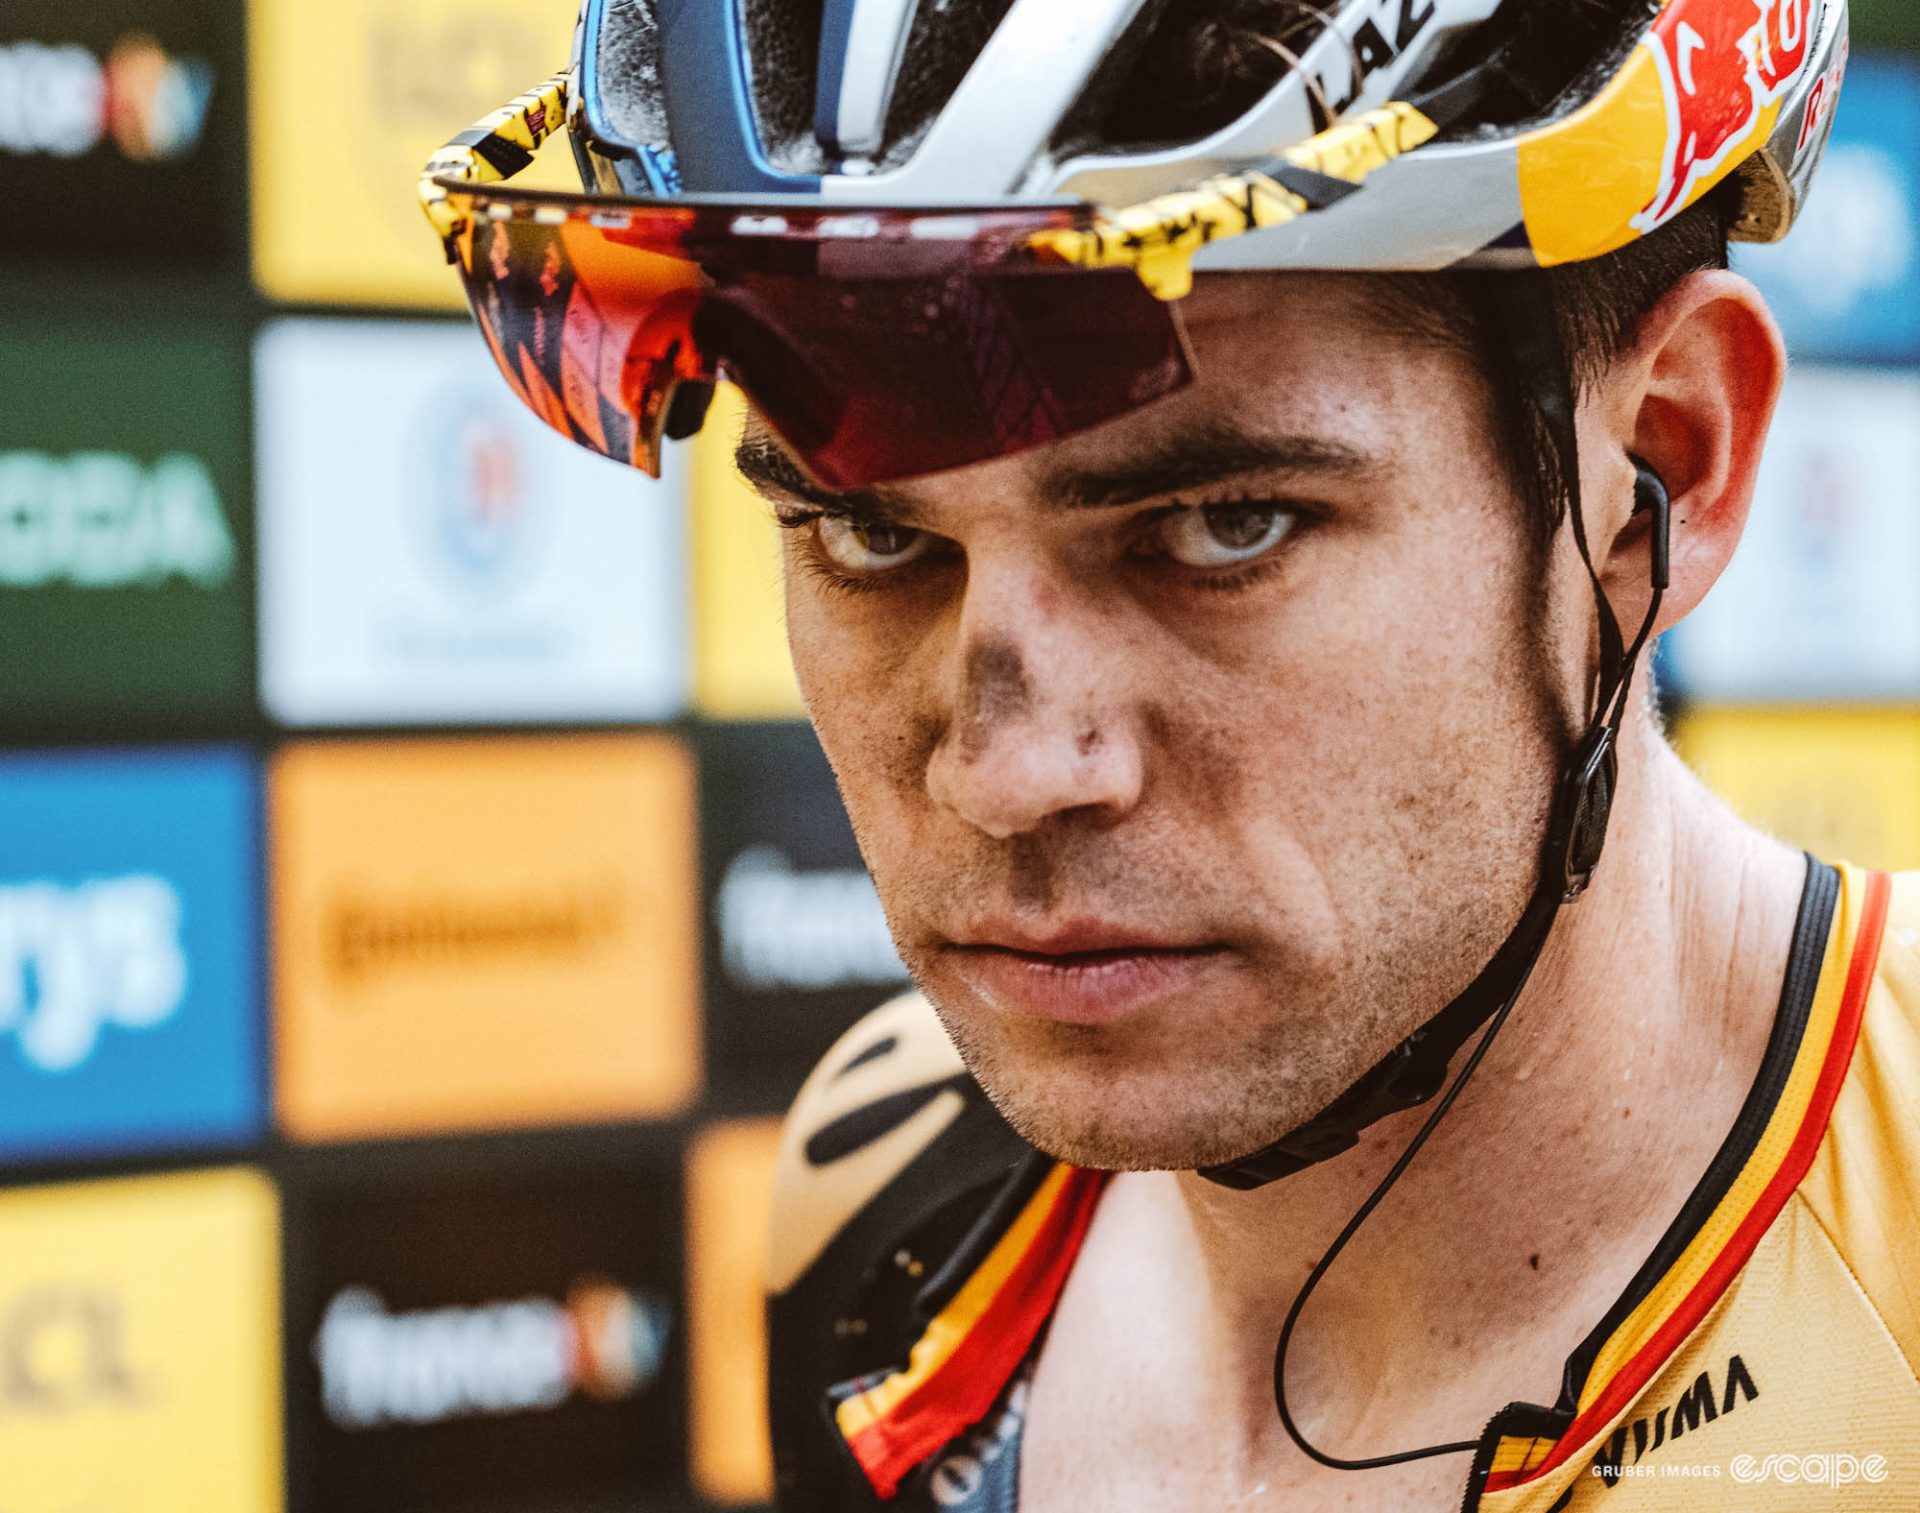 Wout van Aert stares intensely down the barrel of a camera. 